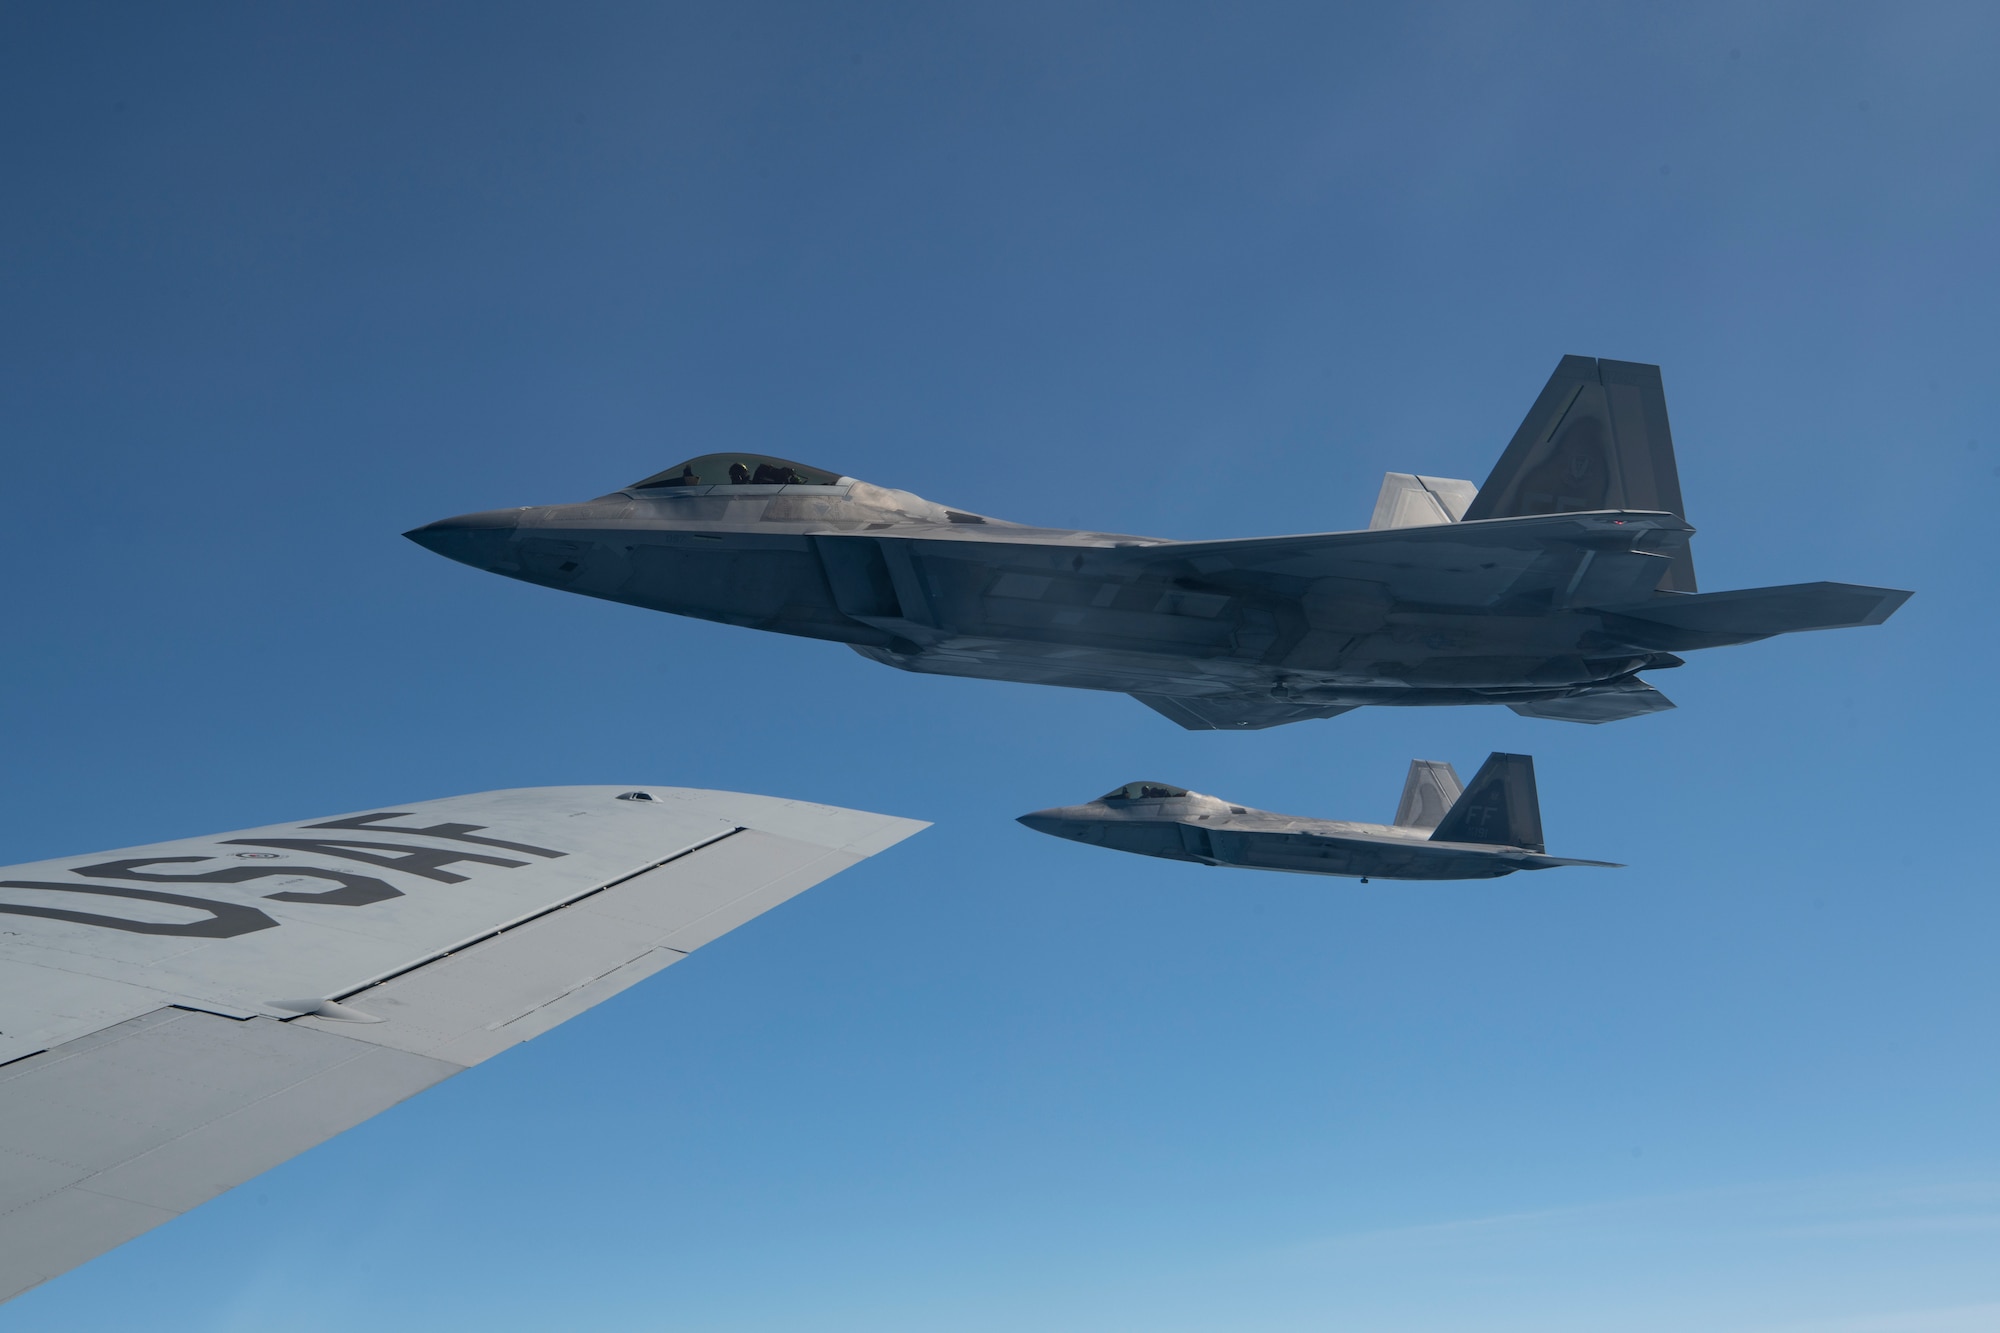 U.S. Air Force F-22 Raptors with the 192nd Fighter Wing, fly alongside a KC-135 Stratotanker with the 117th Air Refueling Wing, after in-flight refueling during exercise Sentry Savannah May, 5, 2022, in a military operations area off the coast of Georgia. Sentry Savannah is a joint total force integrated exercise that showcases the nation's combat aircraft readiness, tests the capabilities of our warfighters in a near-peer environment and trains our next generation of fighter pilots for tomorrow’s fight. (U.S. Air Force photo by Staff Sgt. Hanna Smith)